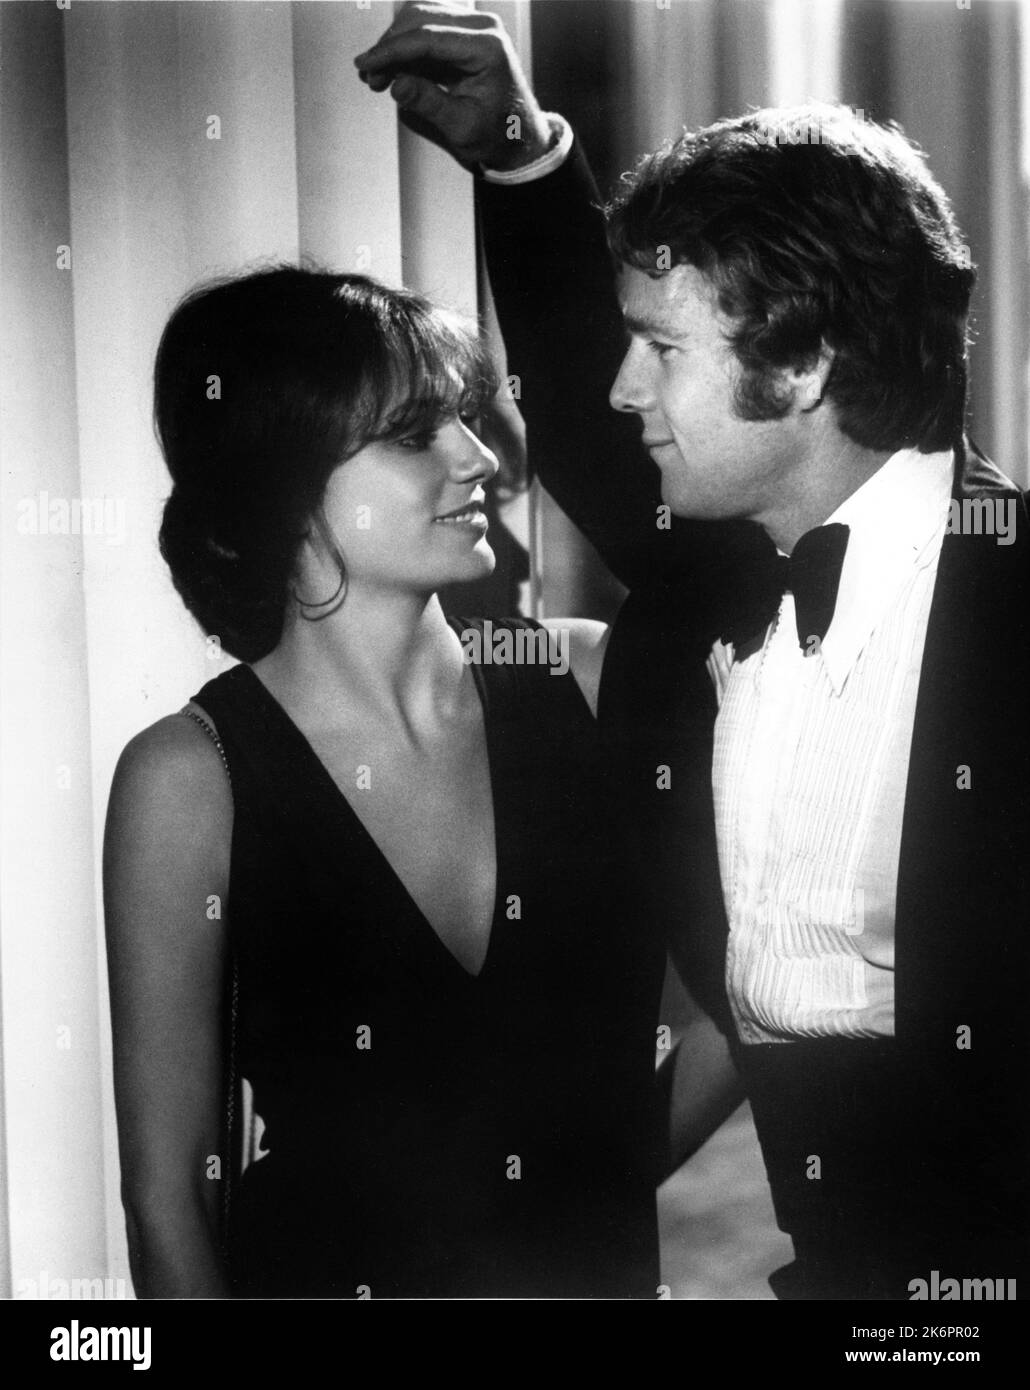 JACQUELINE BISSET and RYAN O'NEAL in THE THIEF WHO CAME TO DINNER 1973 director BUD YORKIN novel Terrence Lore Smith screenplay Walter Hill music Henry Mancini costume design Polly Platt Bud Yorkin Productions / Warner Bros. Stock Photo